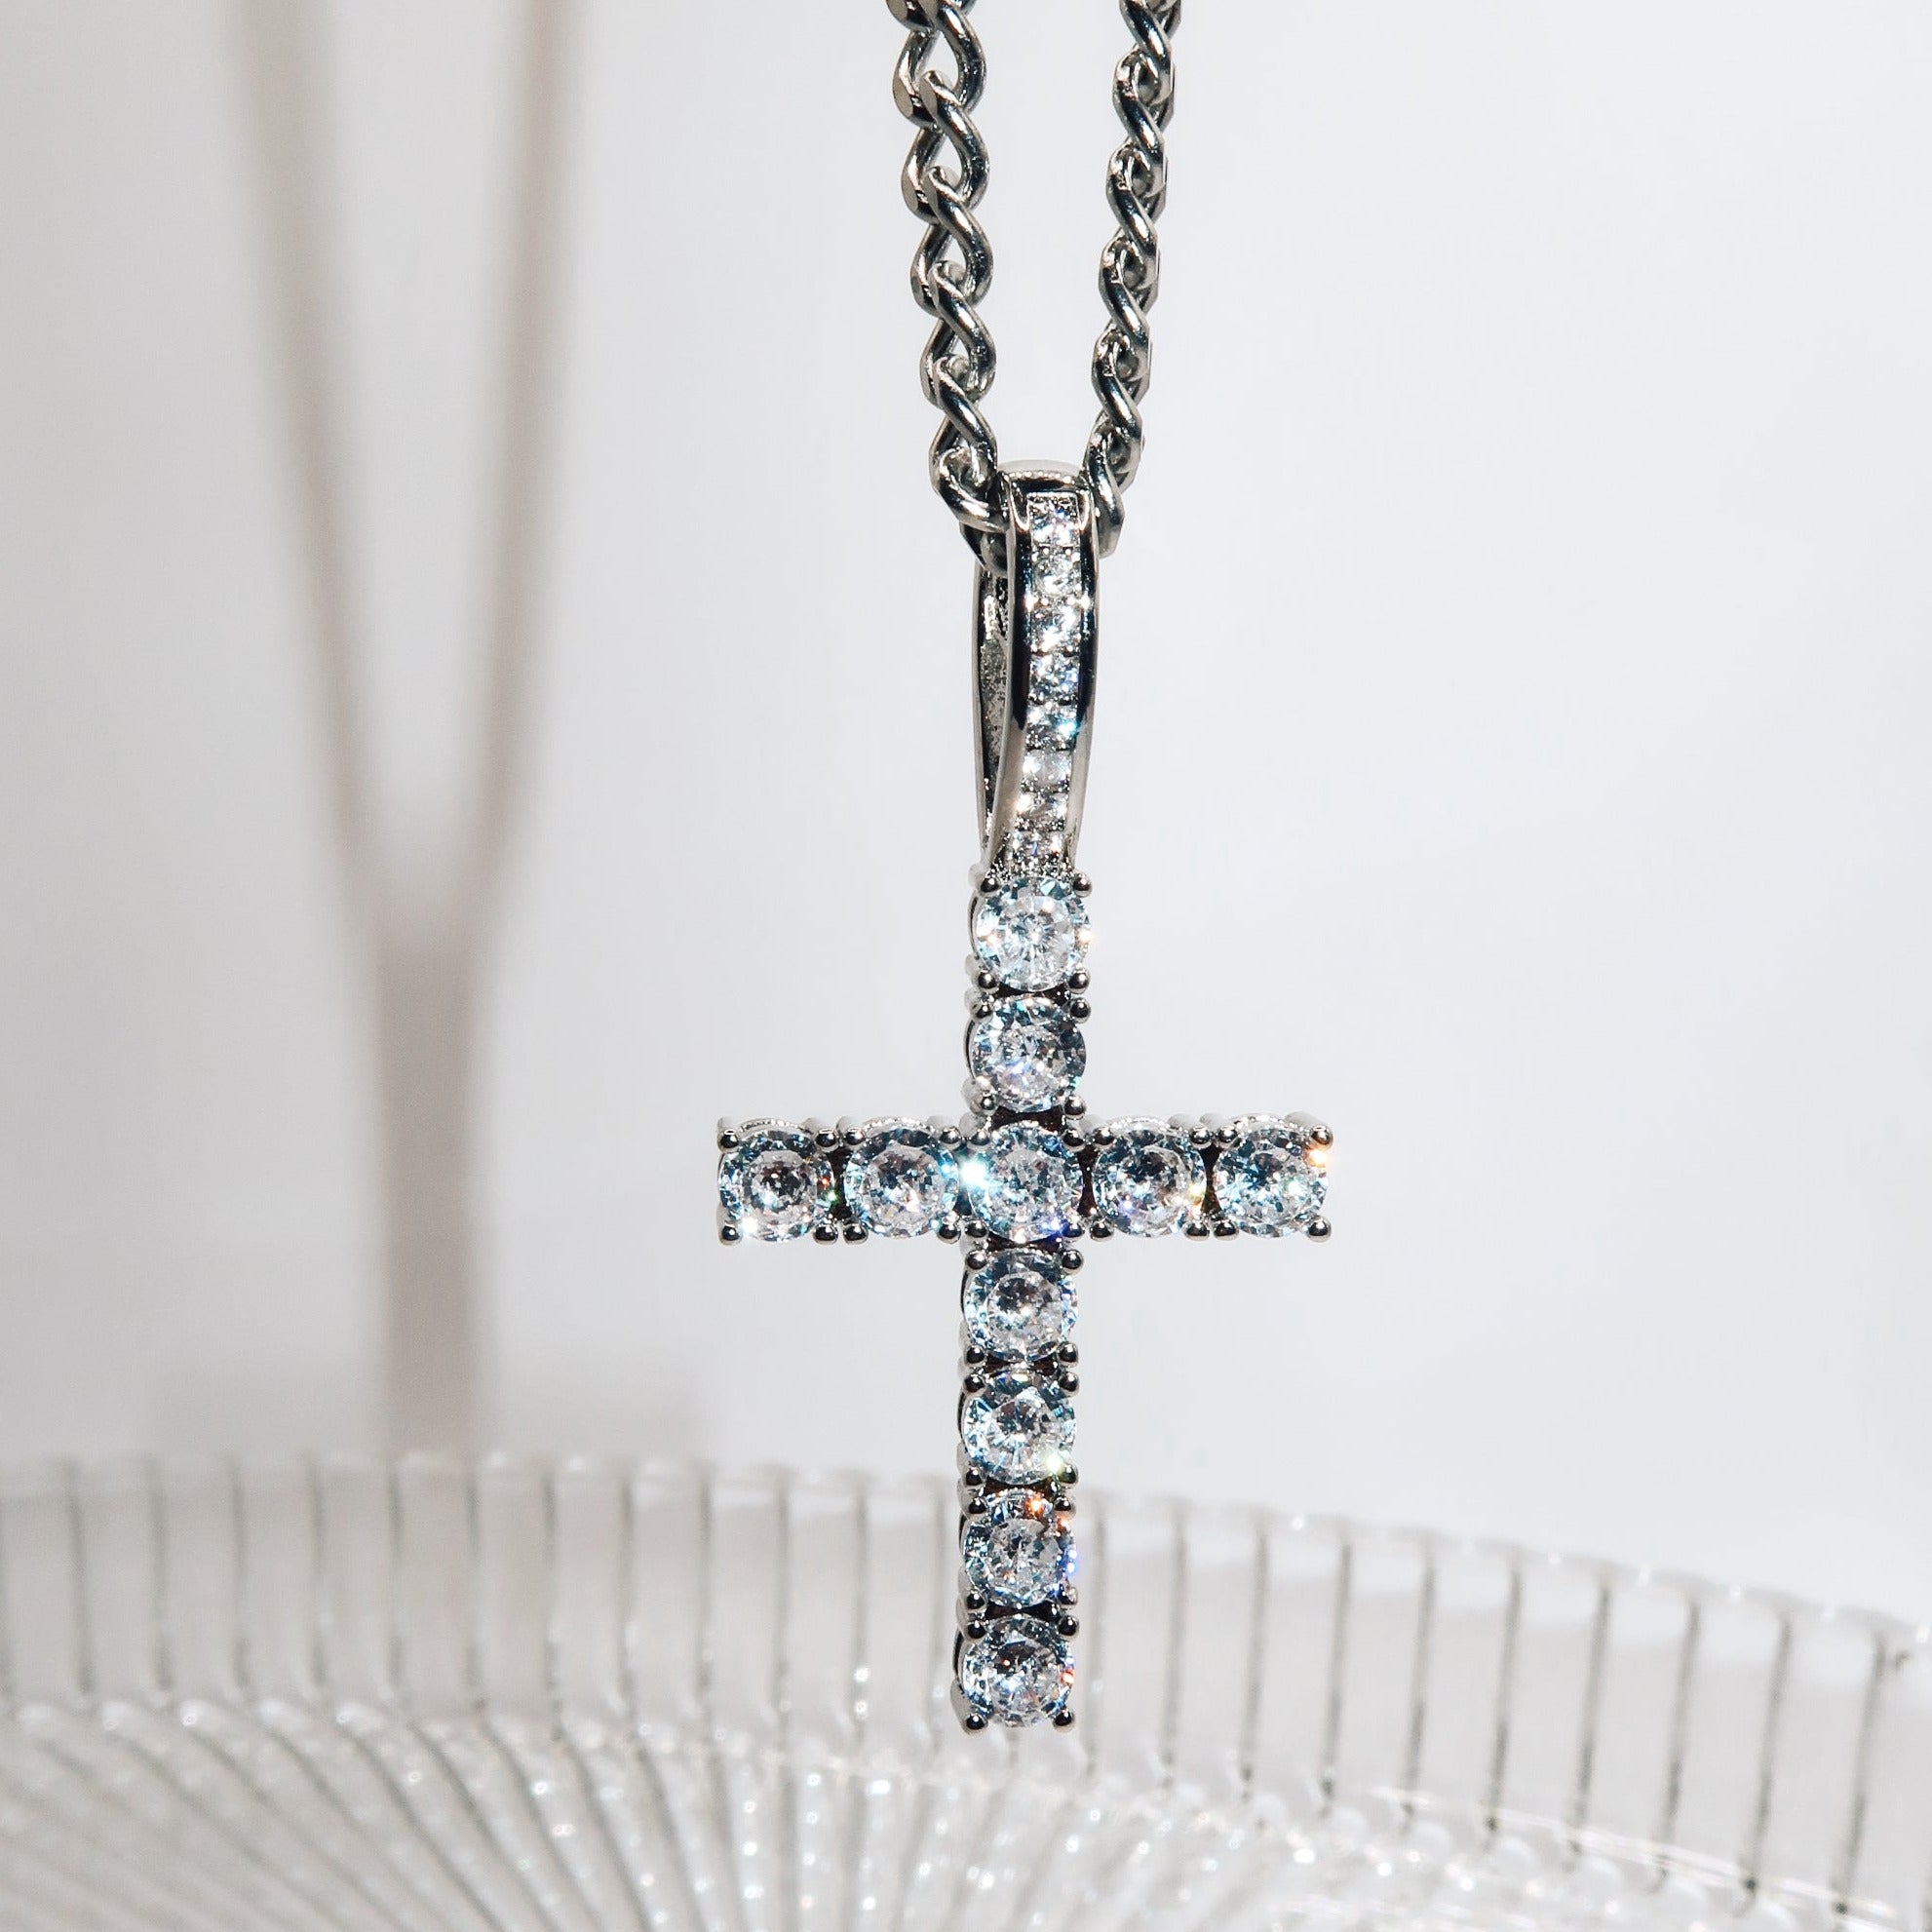 STASSIE - 18K PVD Gold Plated Cross Pendant Necklace with CZ Stones - Mixed Metals